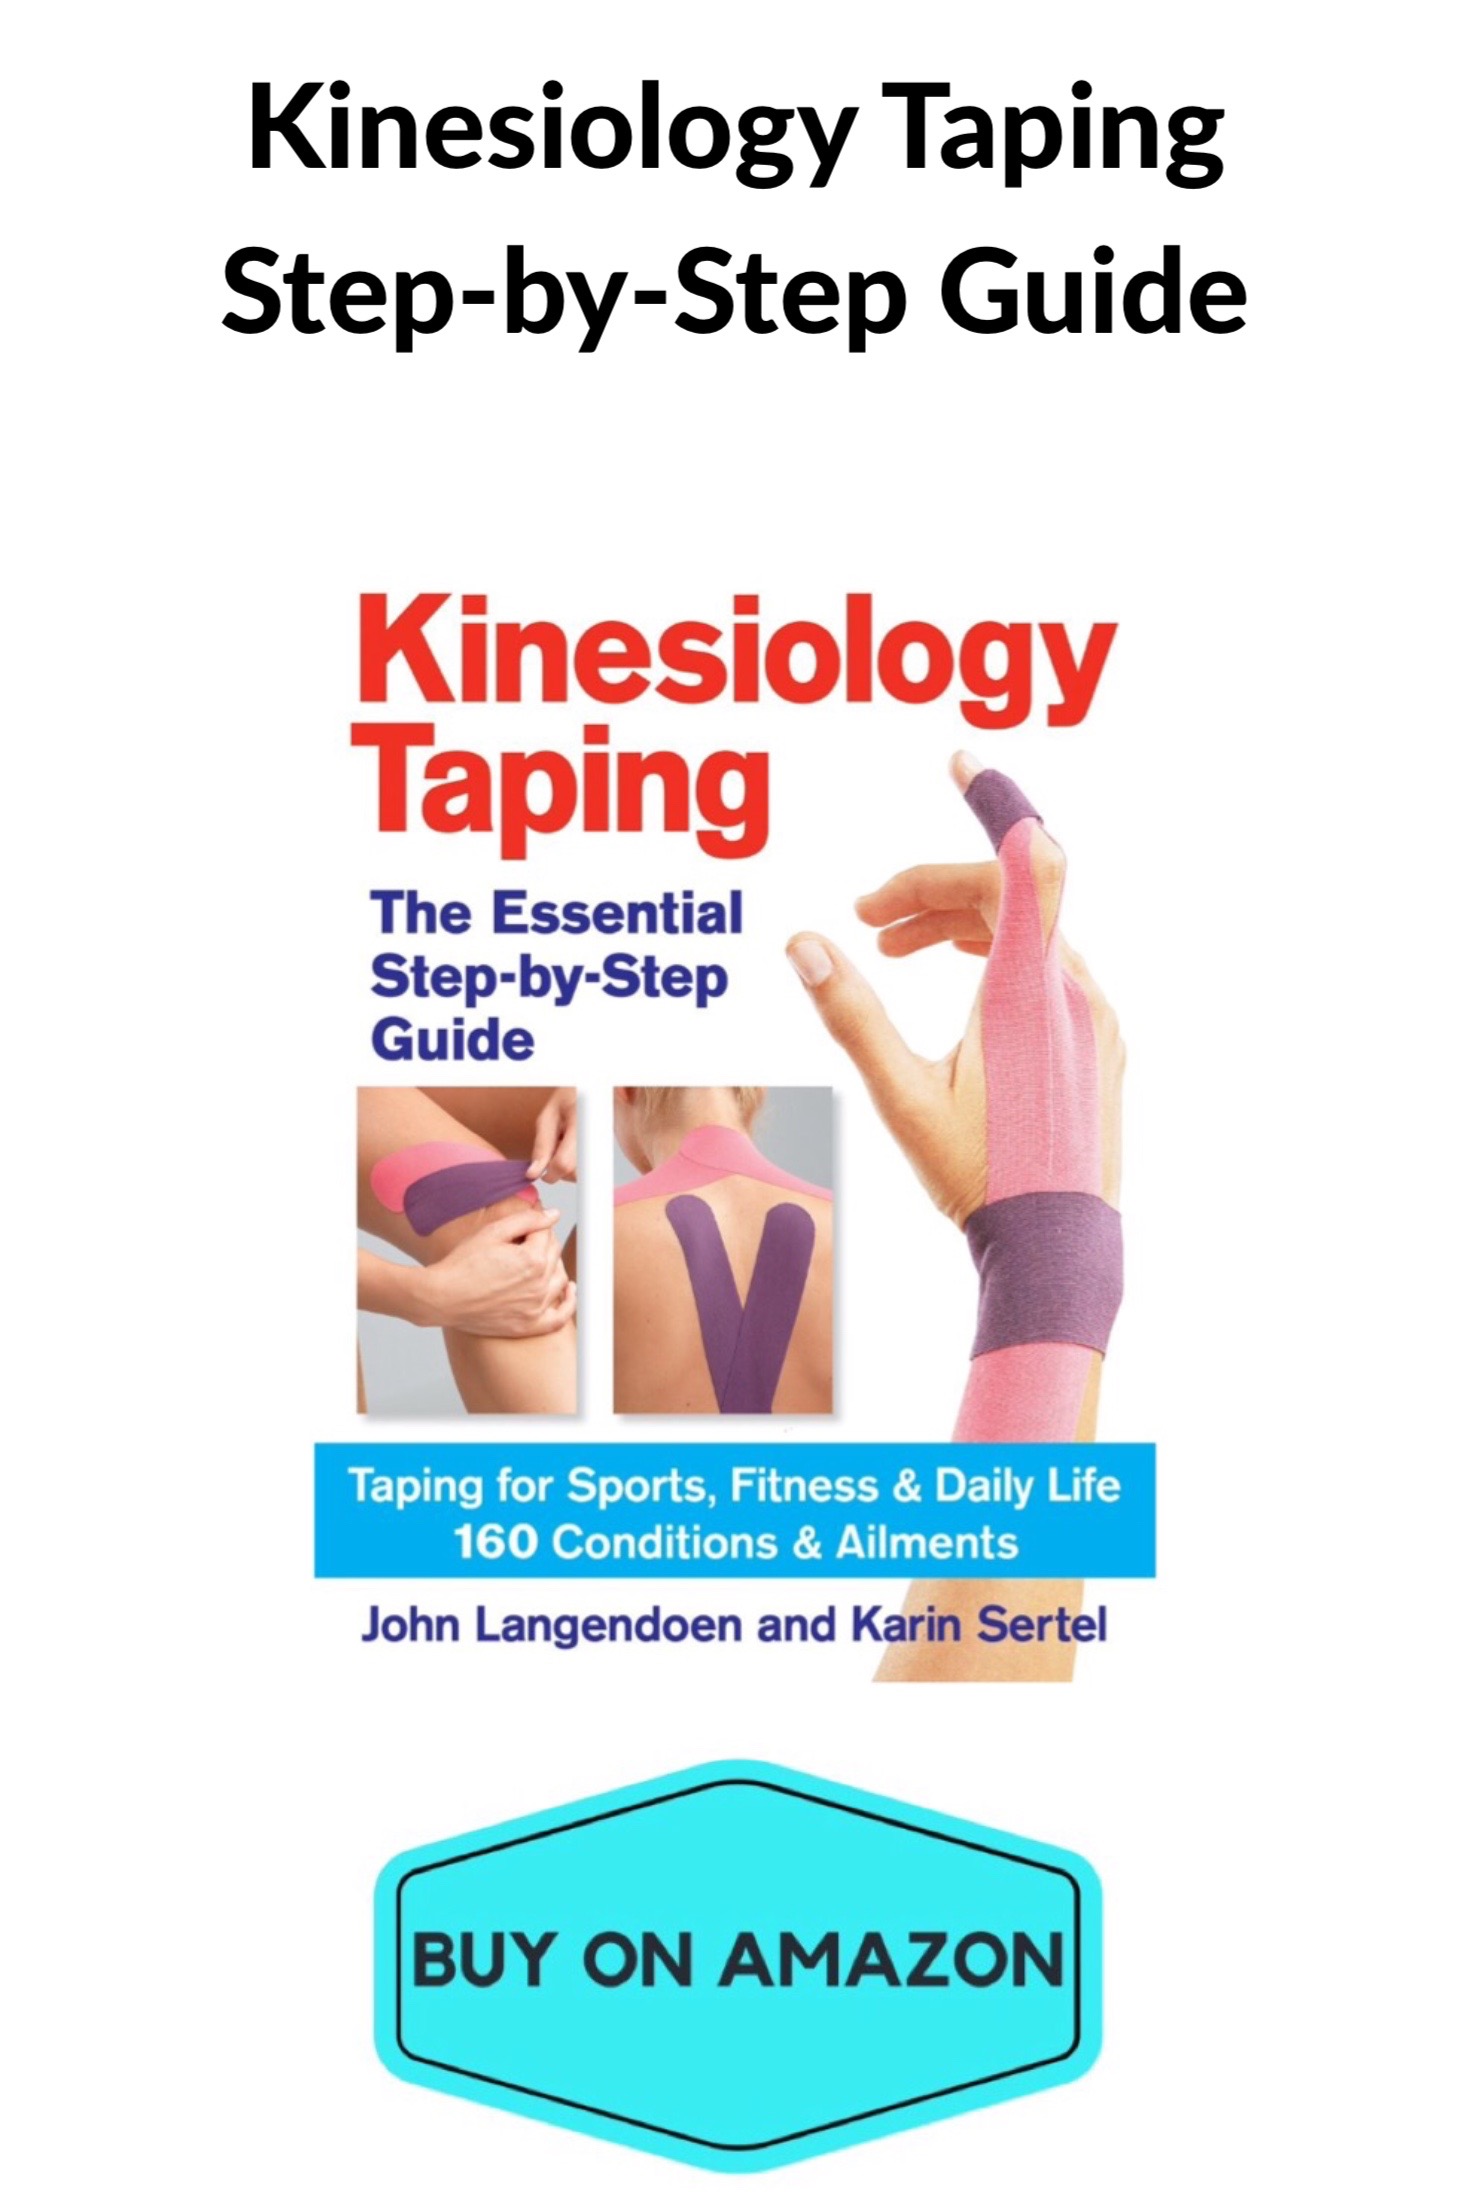 Kinesiology Taping Step-By-Step Guide